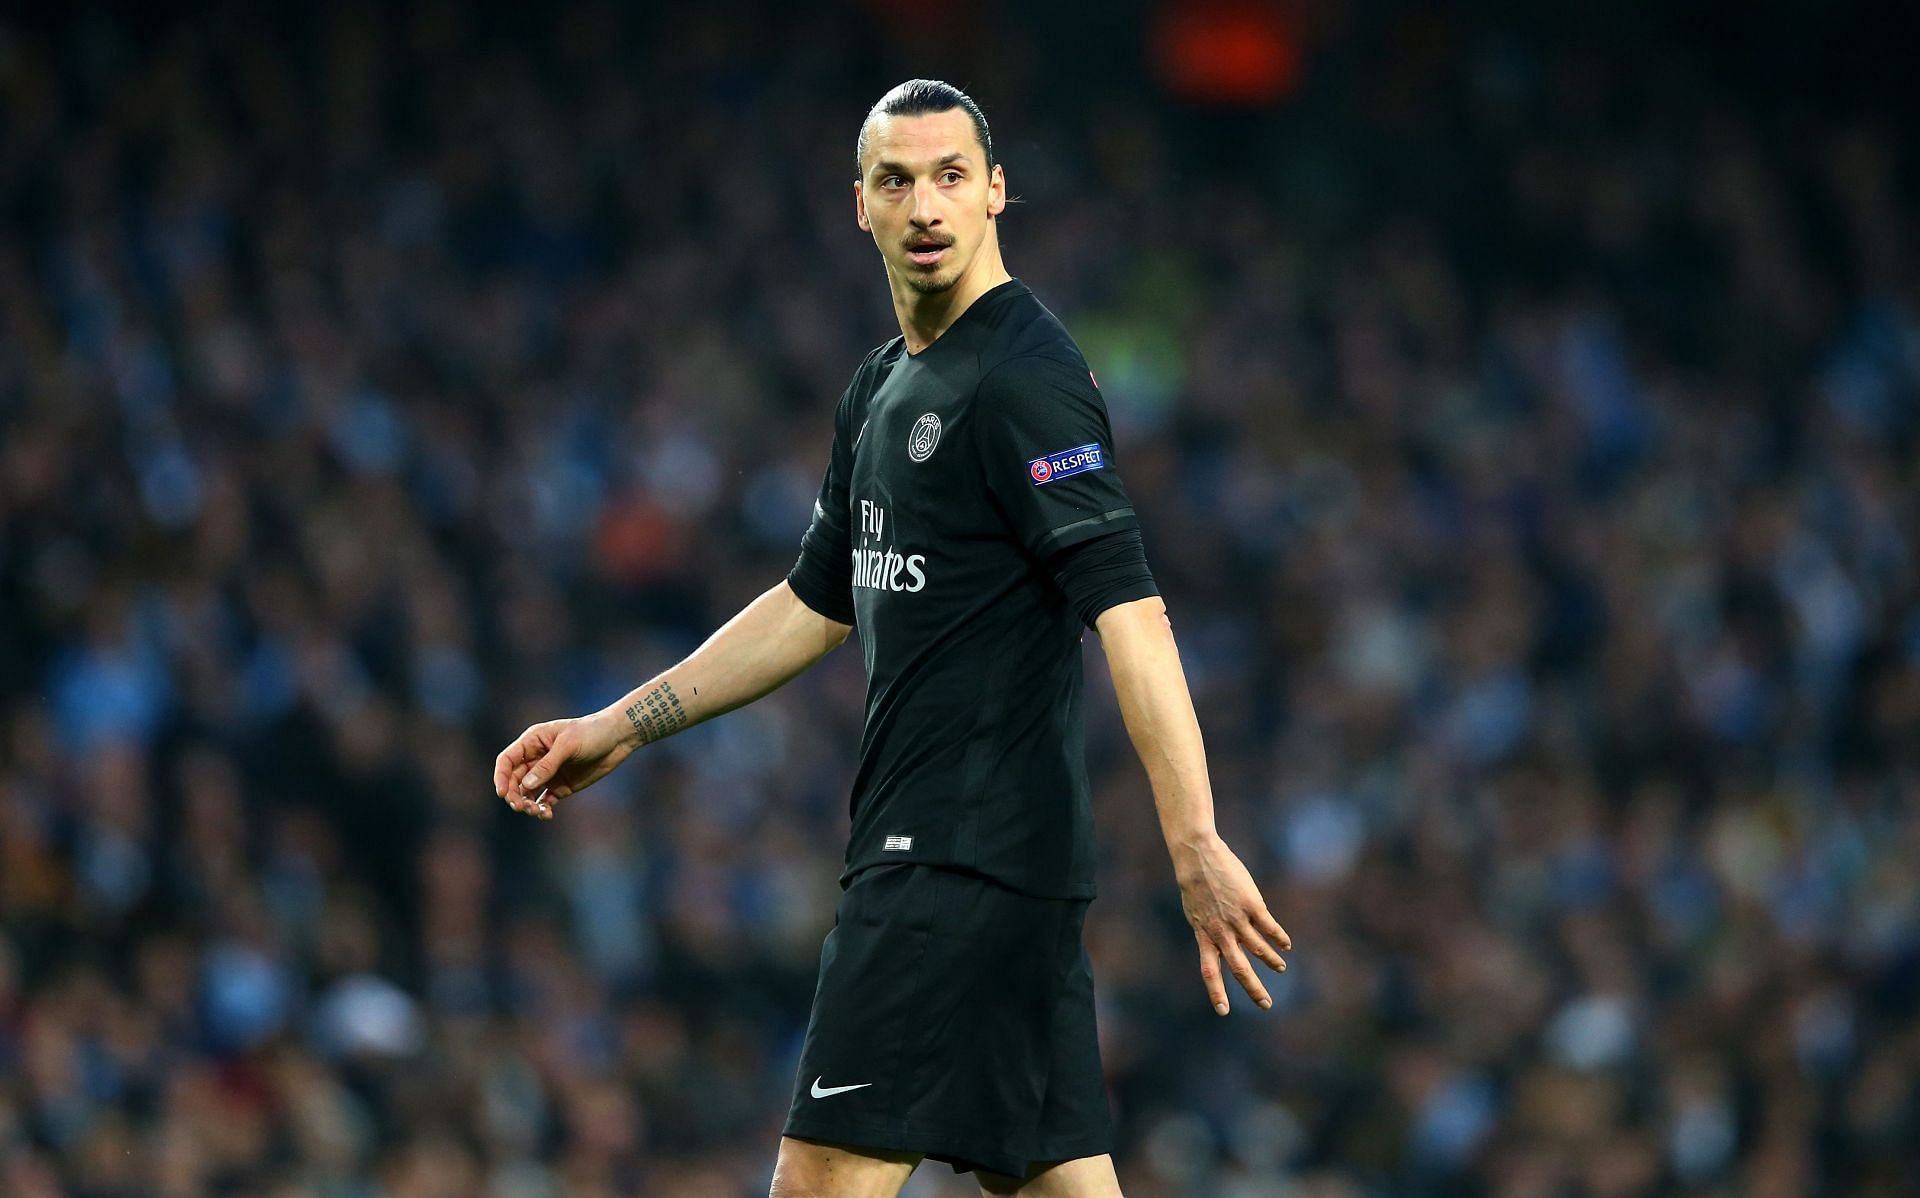 Ibrahimovic played in major European clubs including PSG